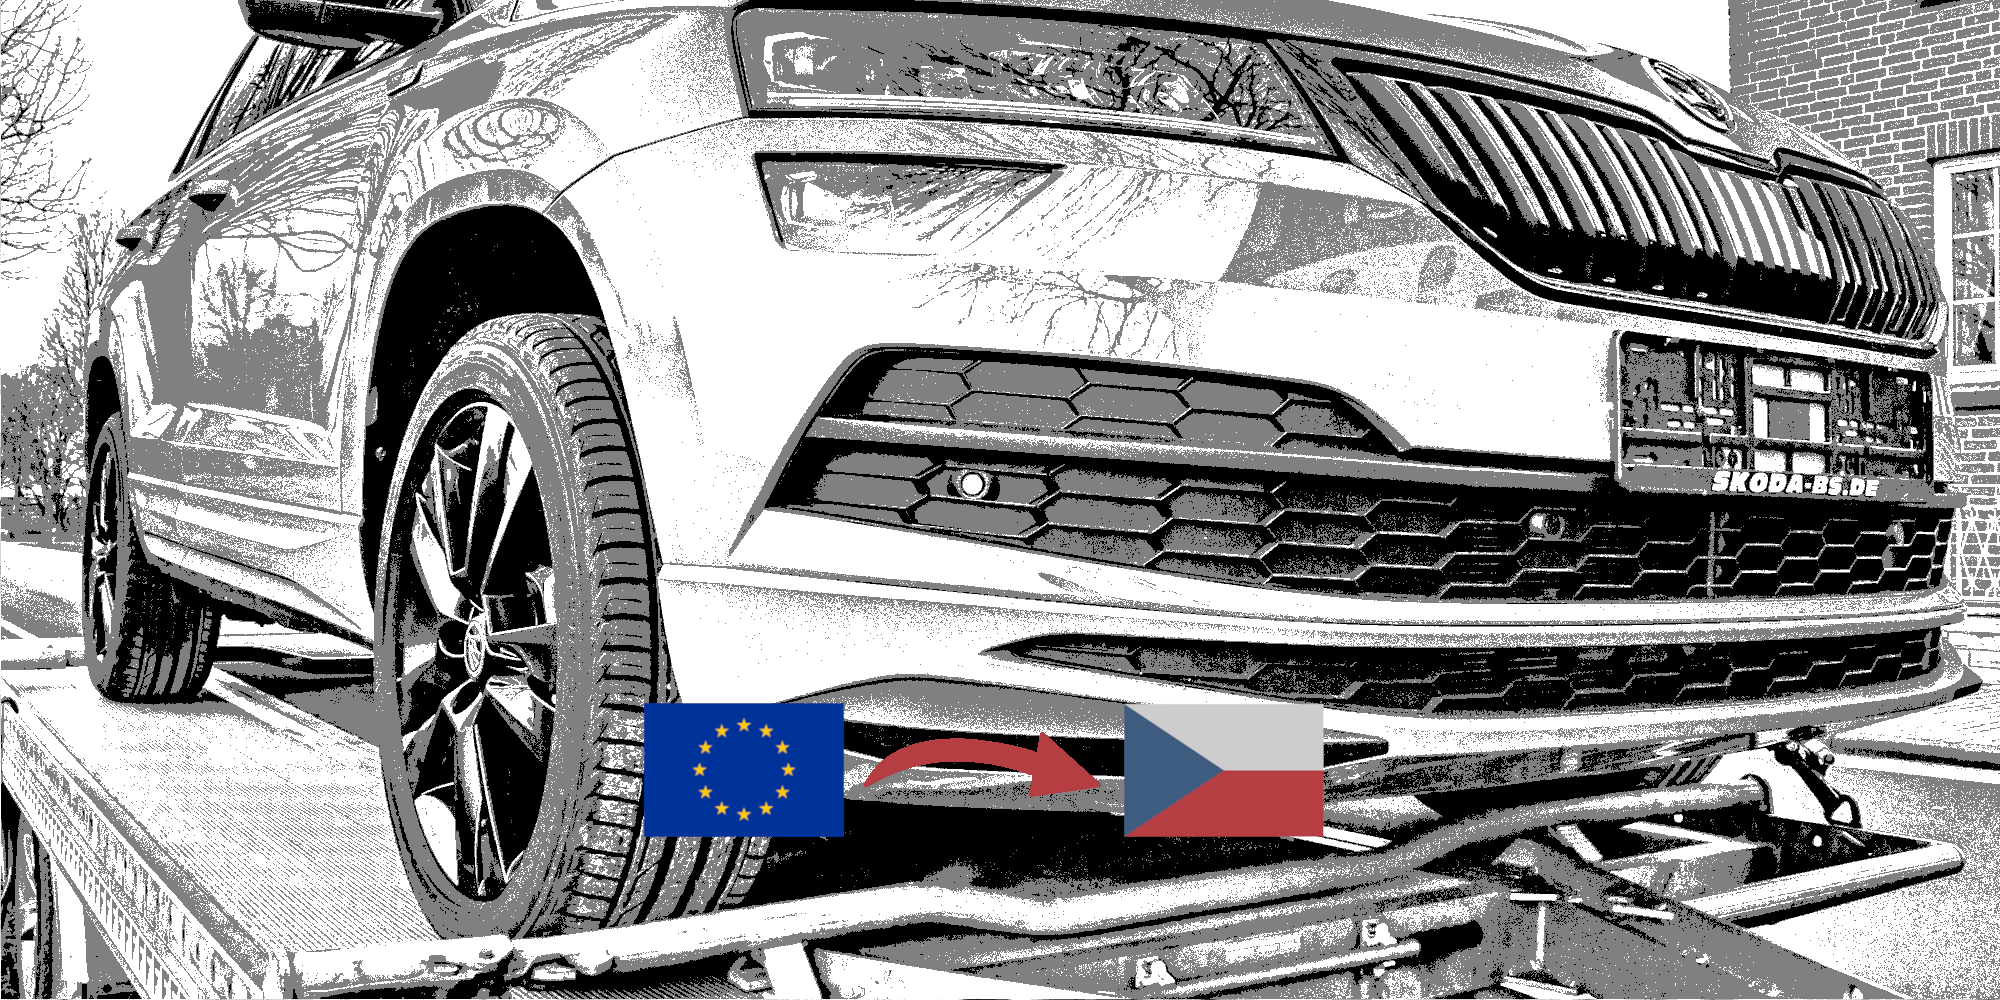 Registering a used vehicle from an EU country